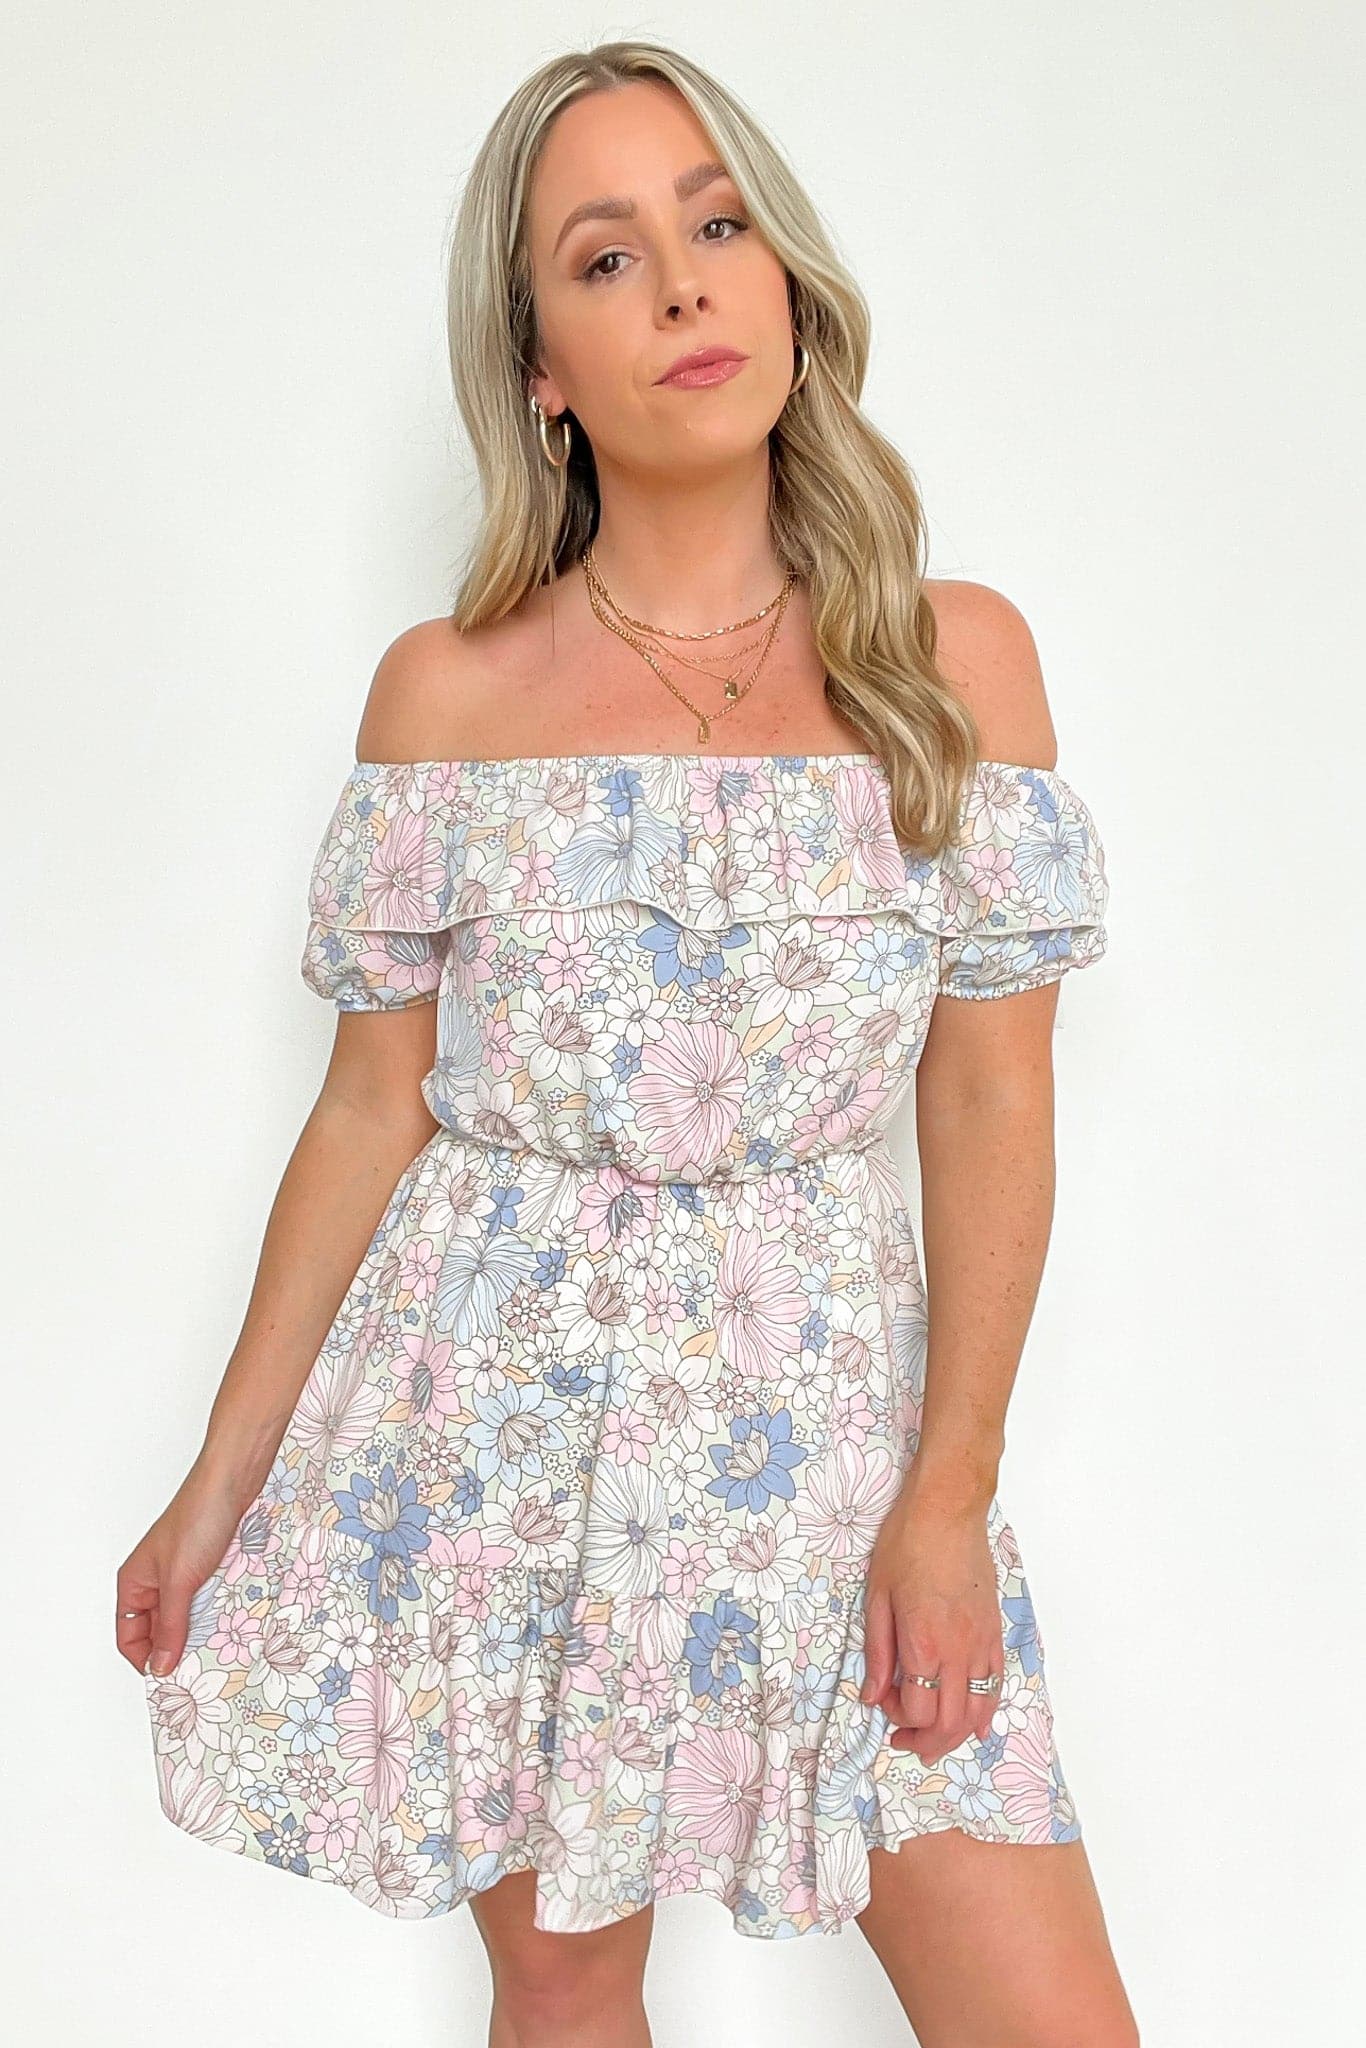  Sweet Grace Off Shoulder Floral Ruffle Dress - FINAL SALE - Madison and Mallory